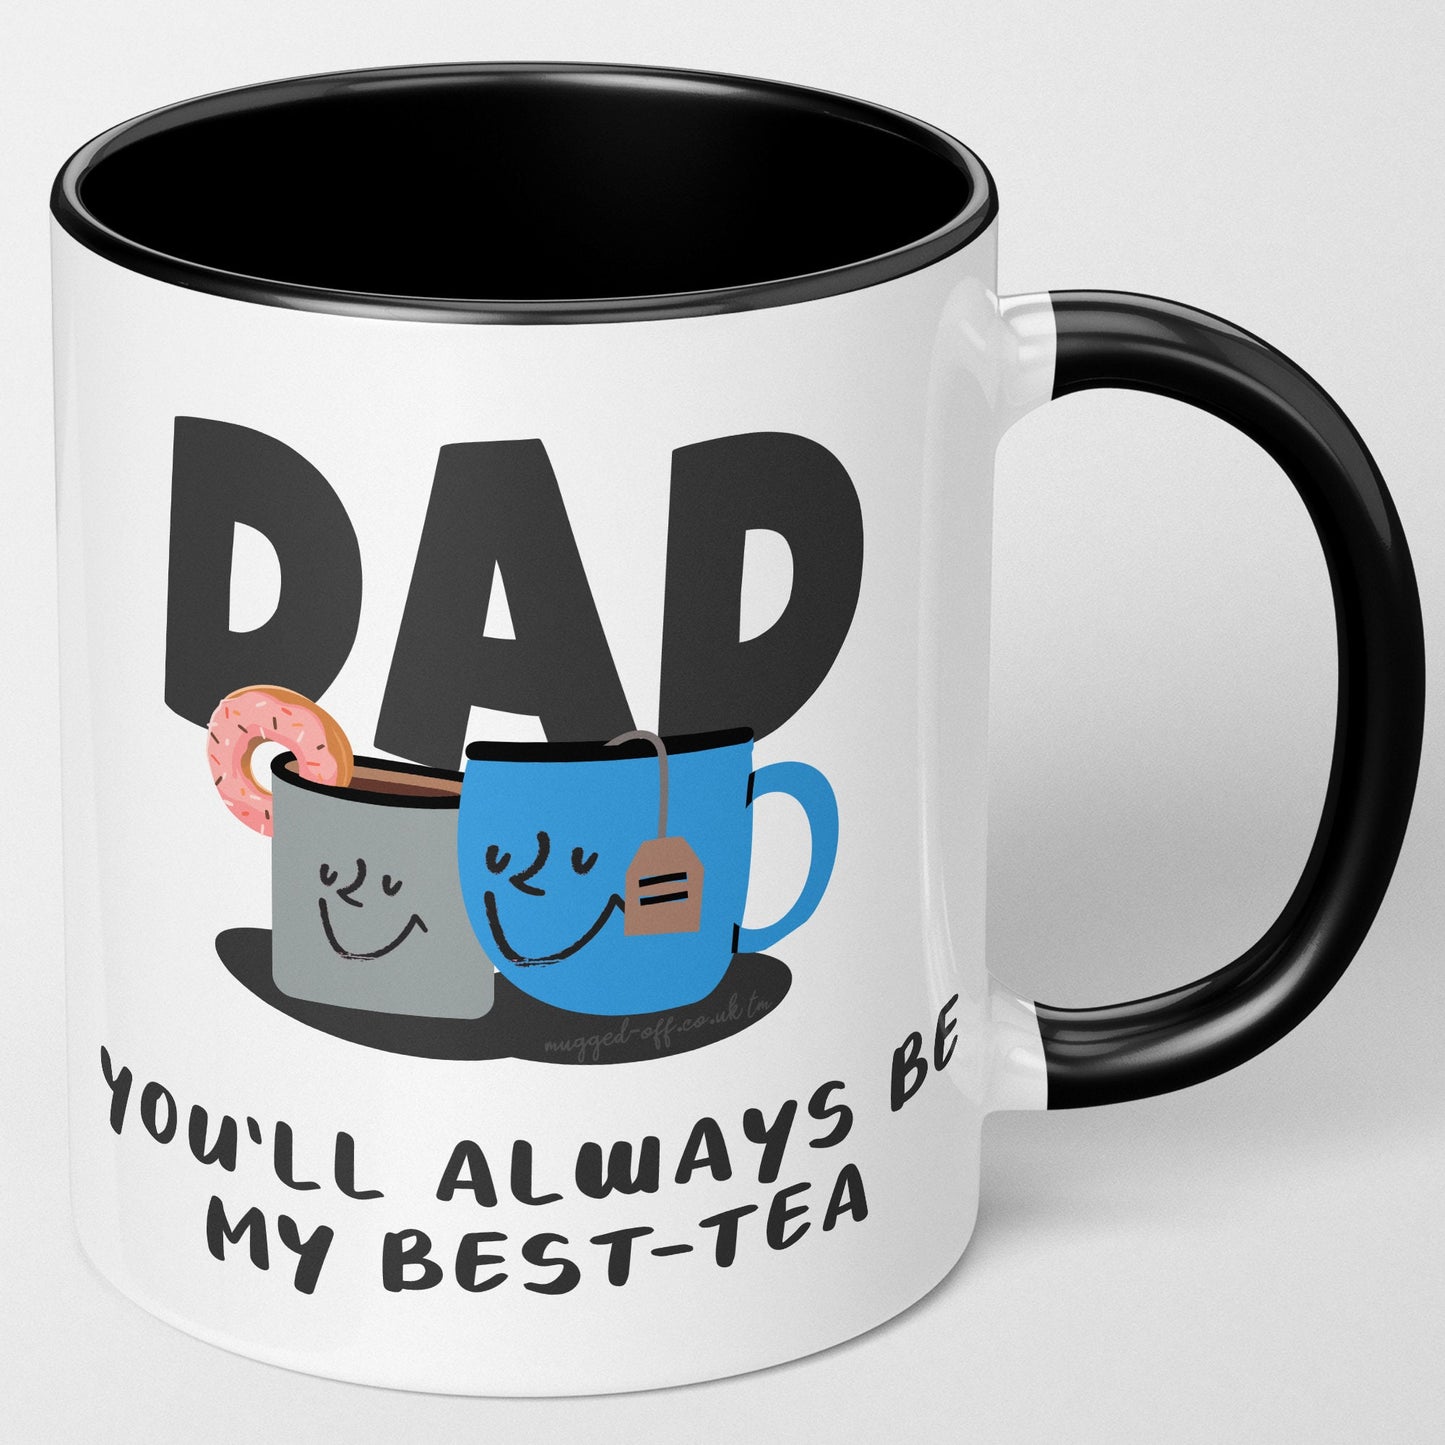 Funny Dad Gifts From Daughter Discount - tundraecology.hi.is 1694734377